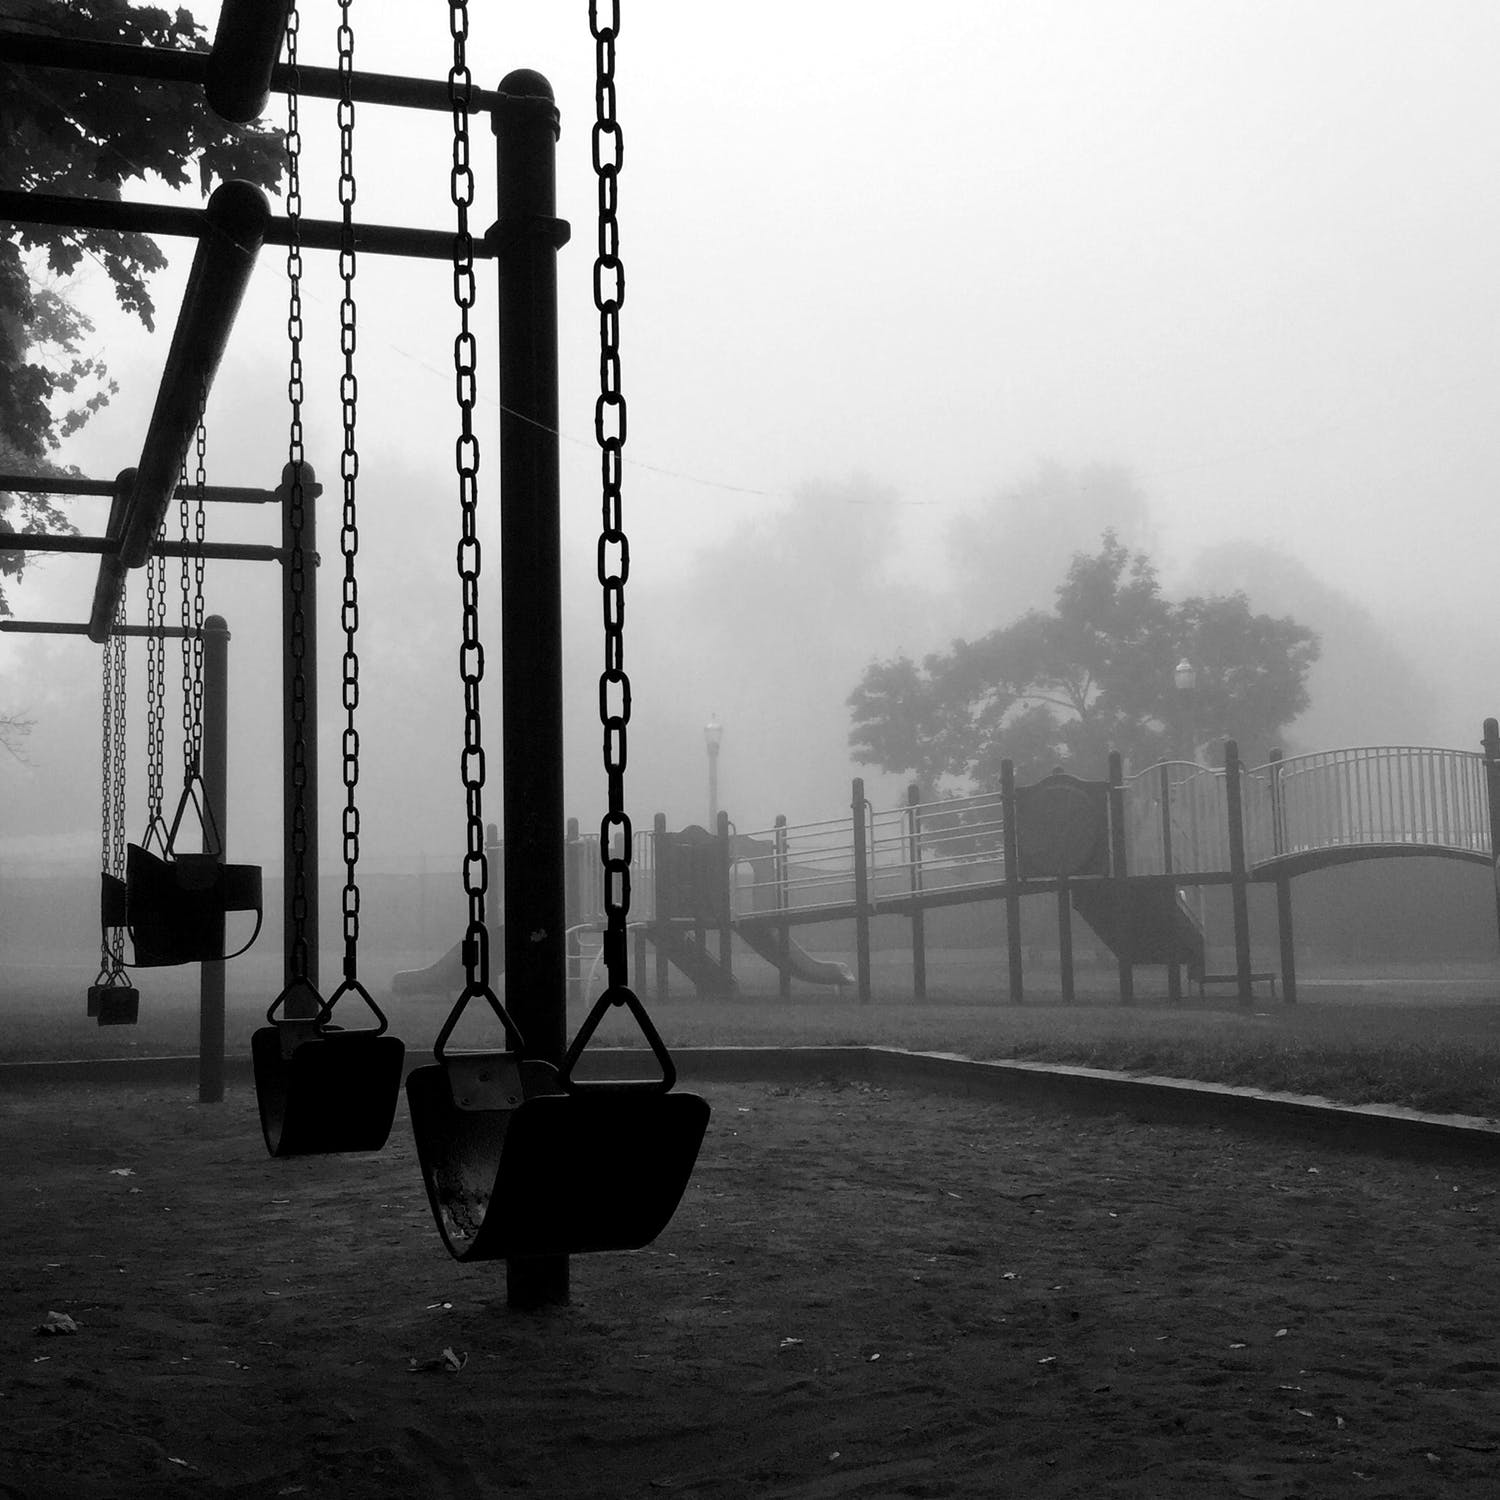 Empty swings on an empty playground